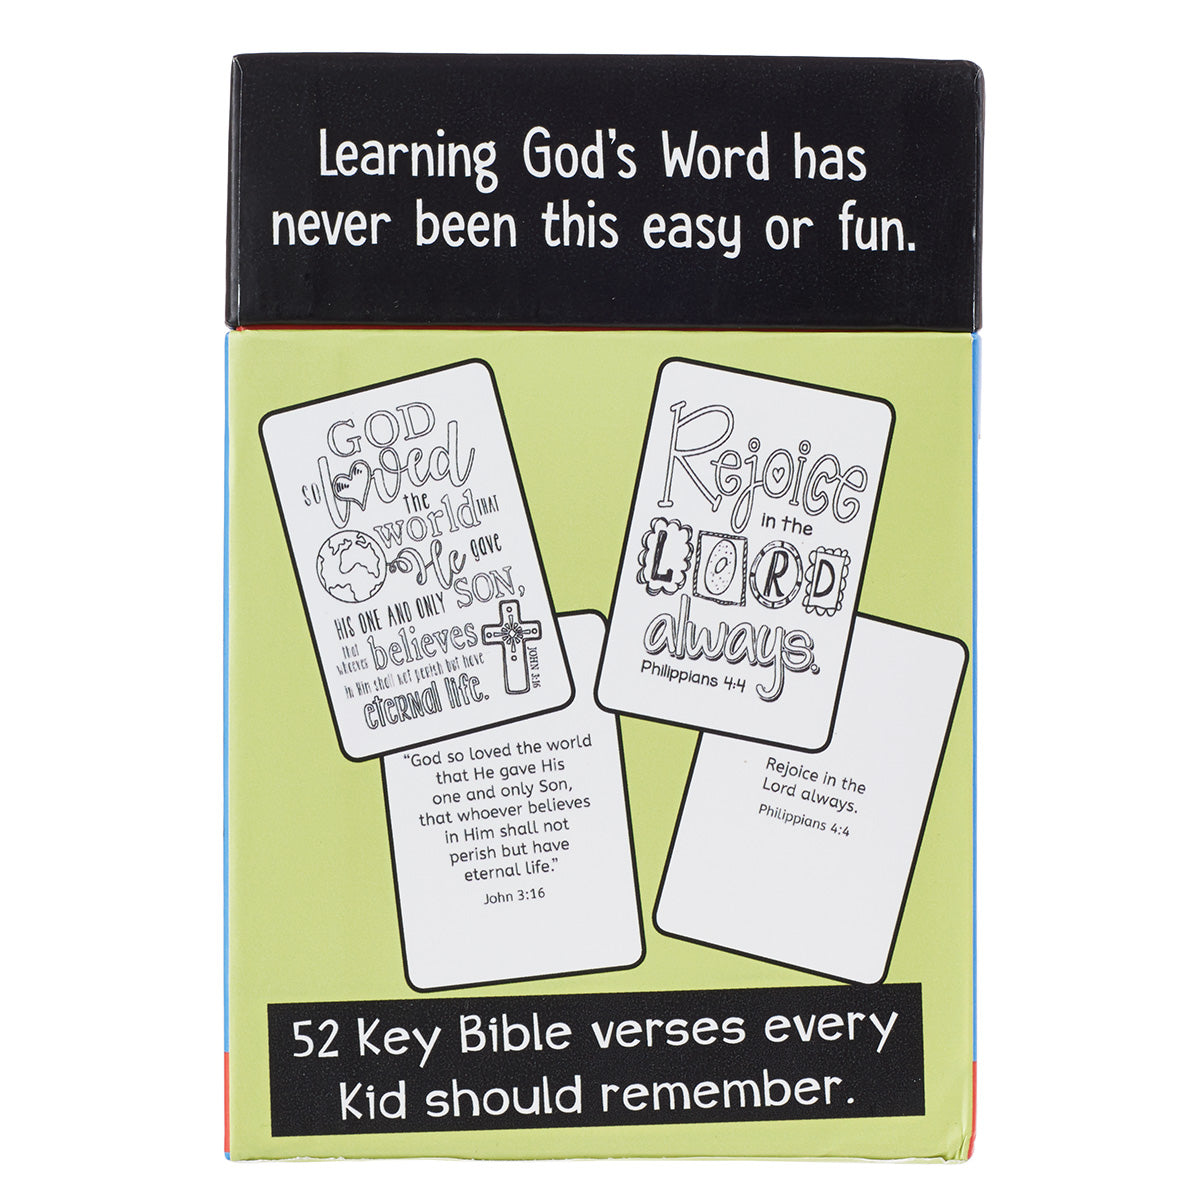 Image of Coloring Cards 52 Verses for Kids (Box Of 52) other